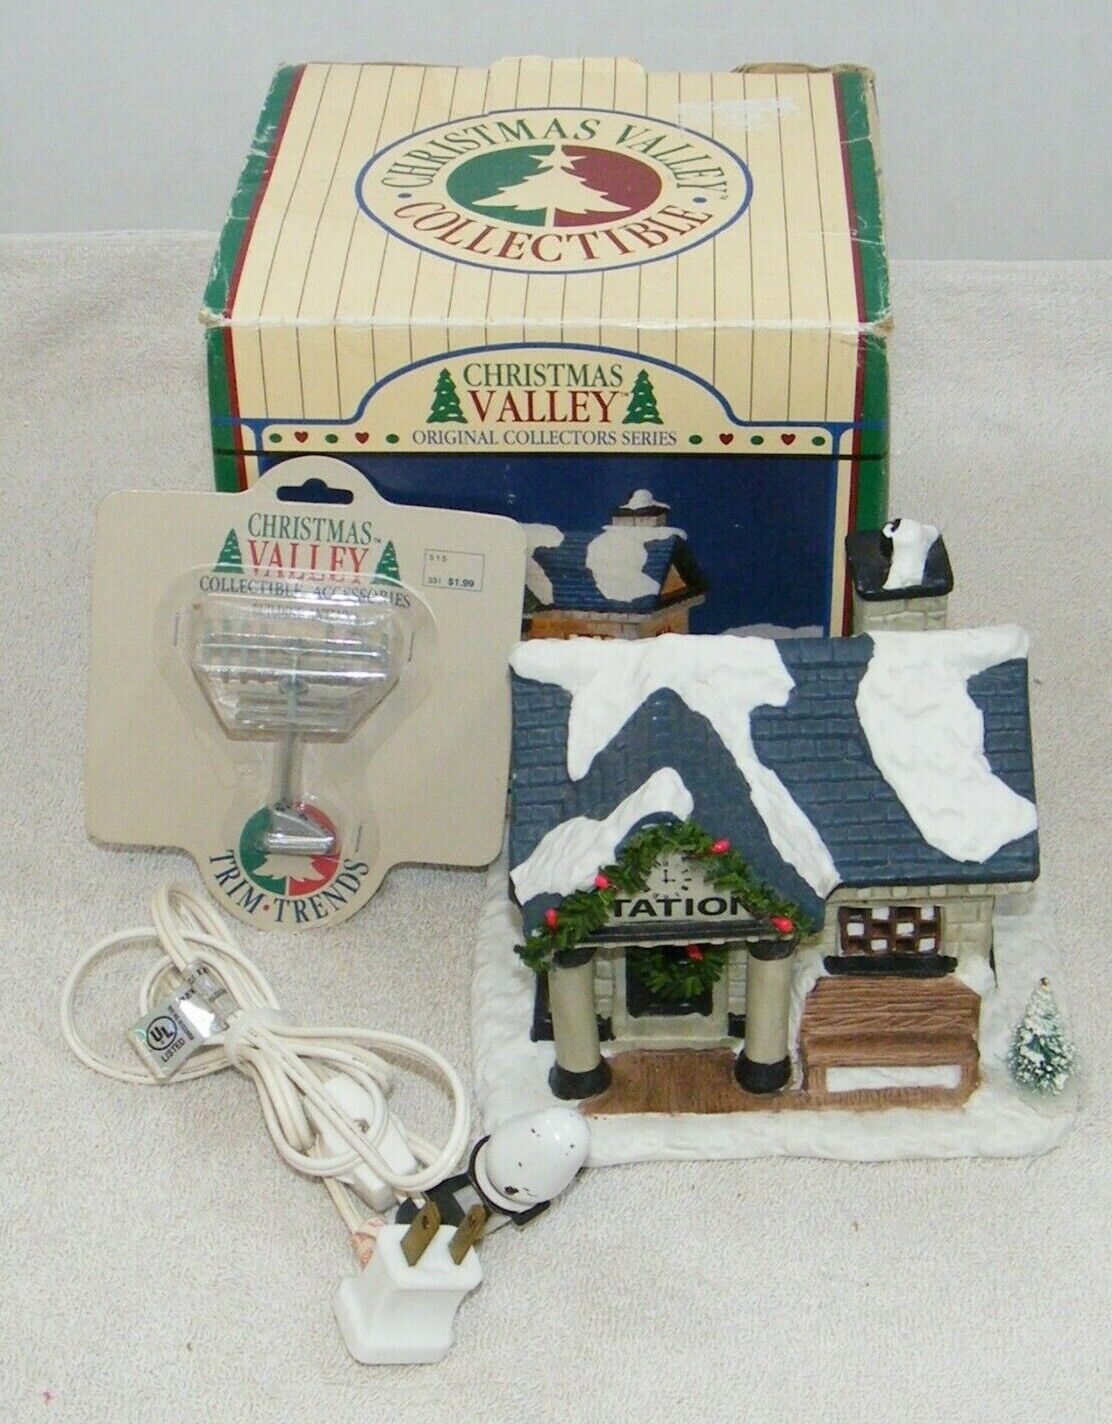 1992 CHRISTMAS VALLEY LIGHTED STATION WITH BUILDING ANTENNA